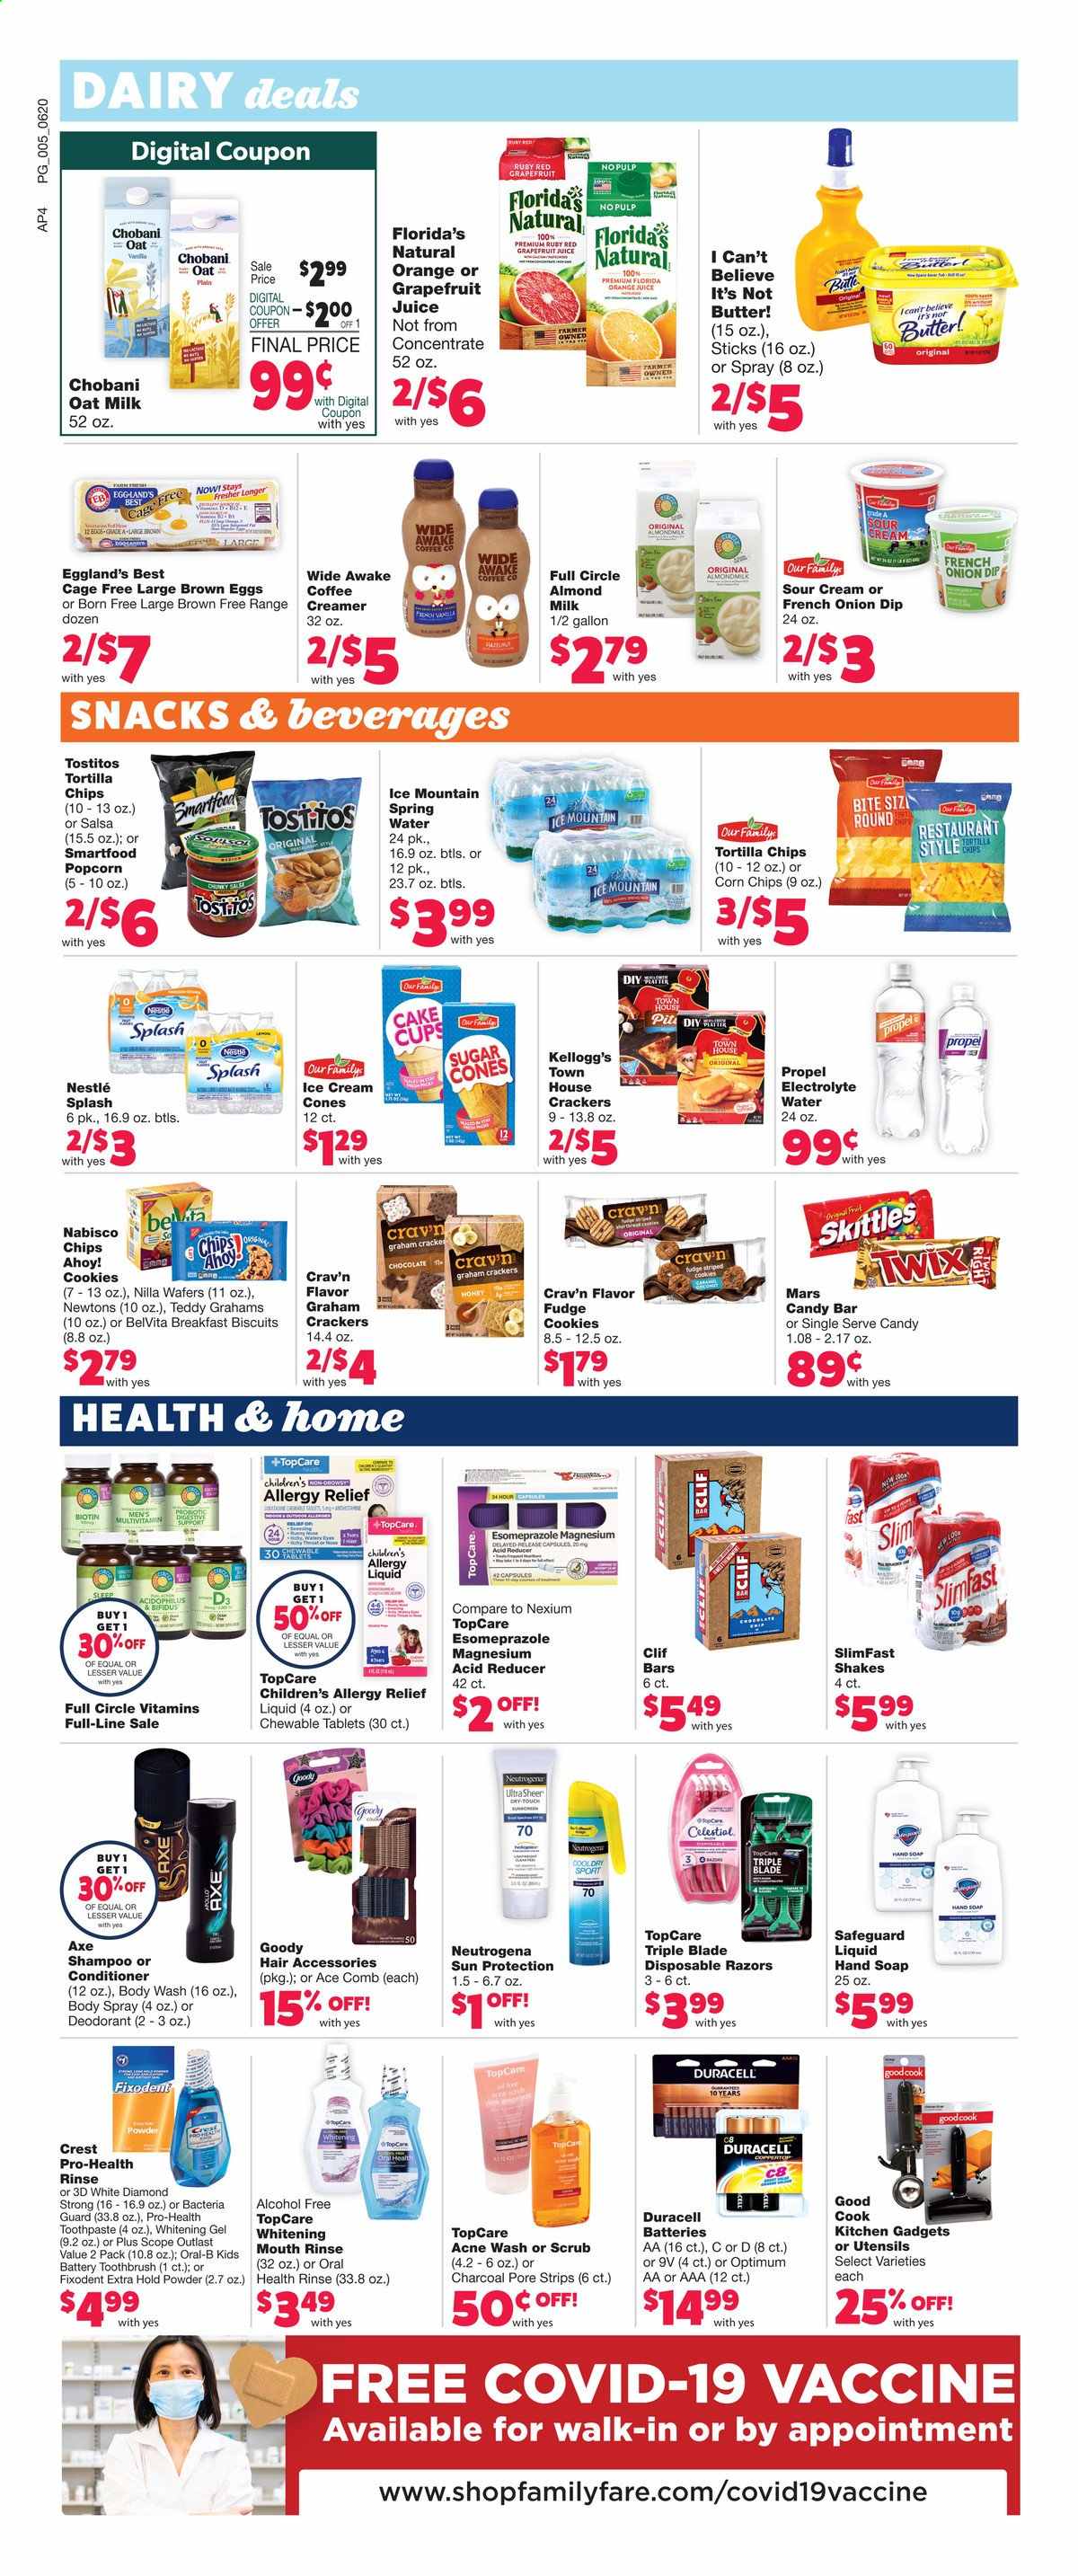 thumbnail - Family Fare Flyer - 06/20/2021 - 06/26/2021 - Sales products - cake, oranges, Slimfast, Chobani, almond milk, milk, shake, oat milk, eggs, cage free eggs, butter, sour cream, creamer, dip, ice cream, strips, cookies, fudge, graham crackers, Nestlé, wafers, snack, Twix, Mars, crackers, Kellogg's, biscuit, Skittles, Chips Ahoy!, Florida's Natural, tortilla chips, chips, Smartfood, corn chips, popcorn, Tostitos, sugar, belVita, salsa, juice, spring water, Ice Mountain, coffee, body wash, shampoo, hand soap, soap, toothbrush, Oral-B, toothpaste, Fixodent, Crest, Neutrogena, conditioner, comb, body spray, anti-perspirant, deodorant, disposable razor, gallon, utensils, cup, Duracell, Biotin, magnesium, Nexium, allergy relief. Page 6.